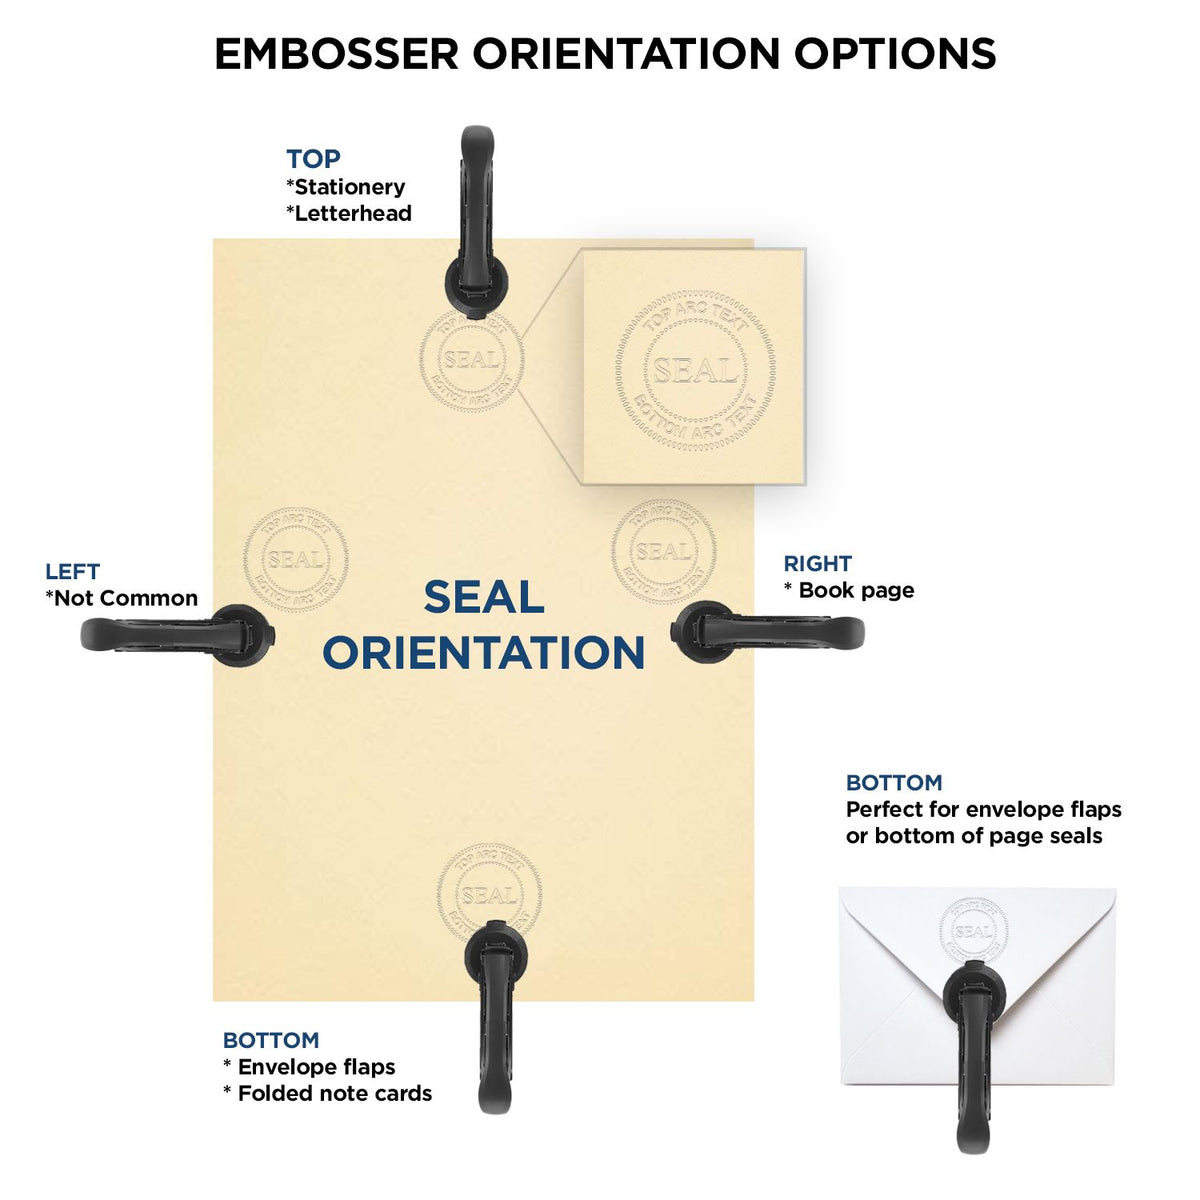 An infographic for the State of Georgia Extended Long Reach Engineer Seal showing embosser orientation, this is showing examples of a top, bottom, right and left insert.